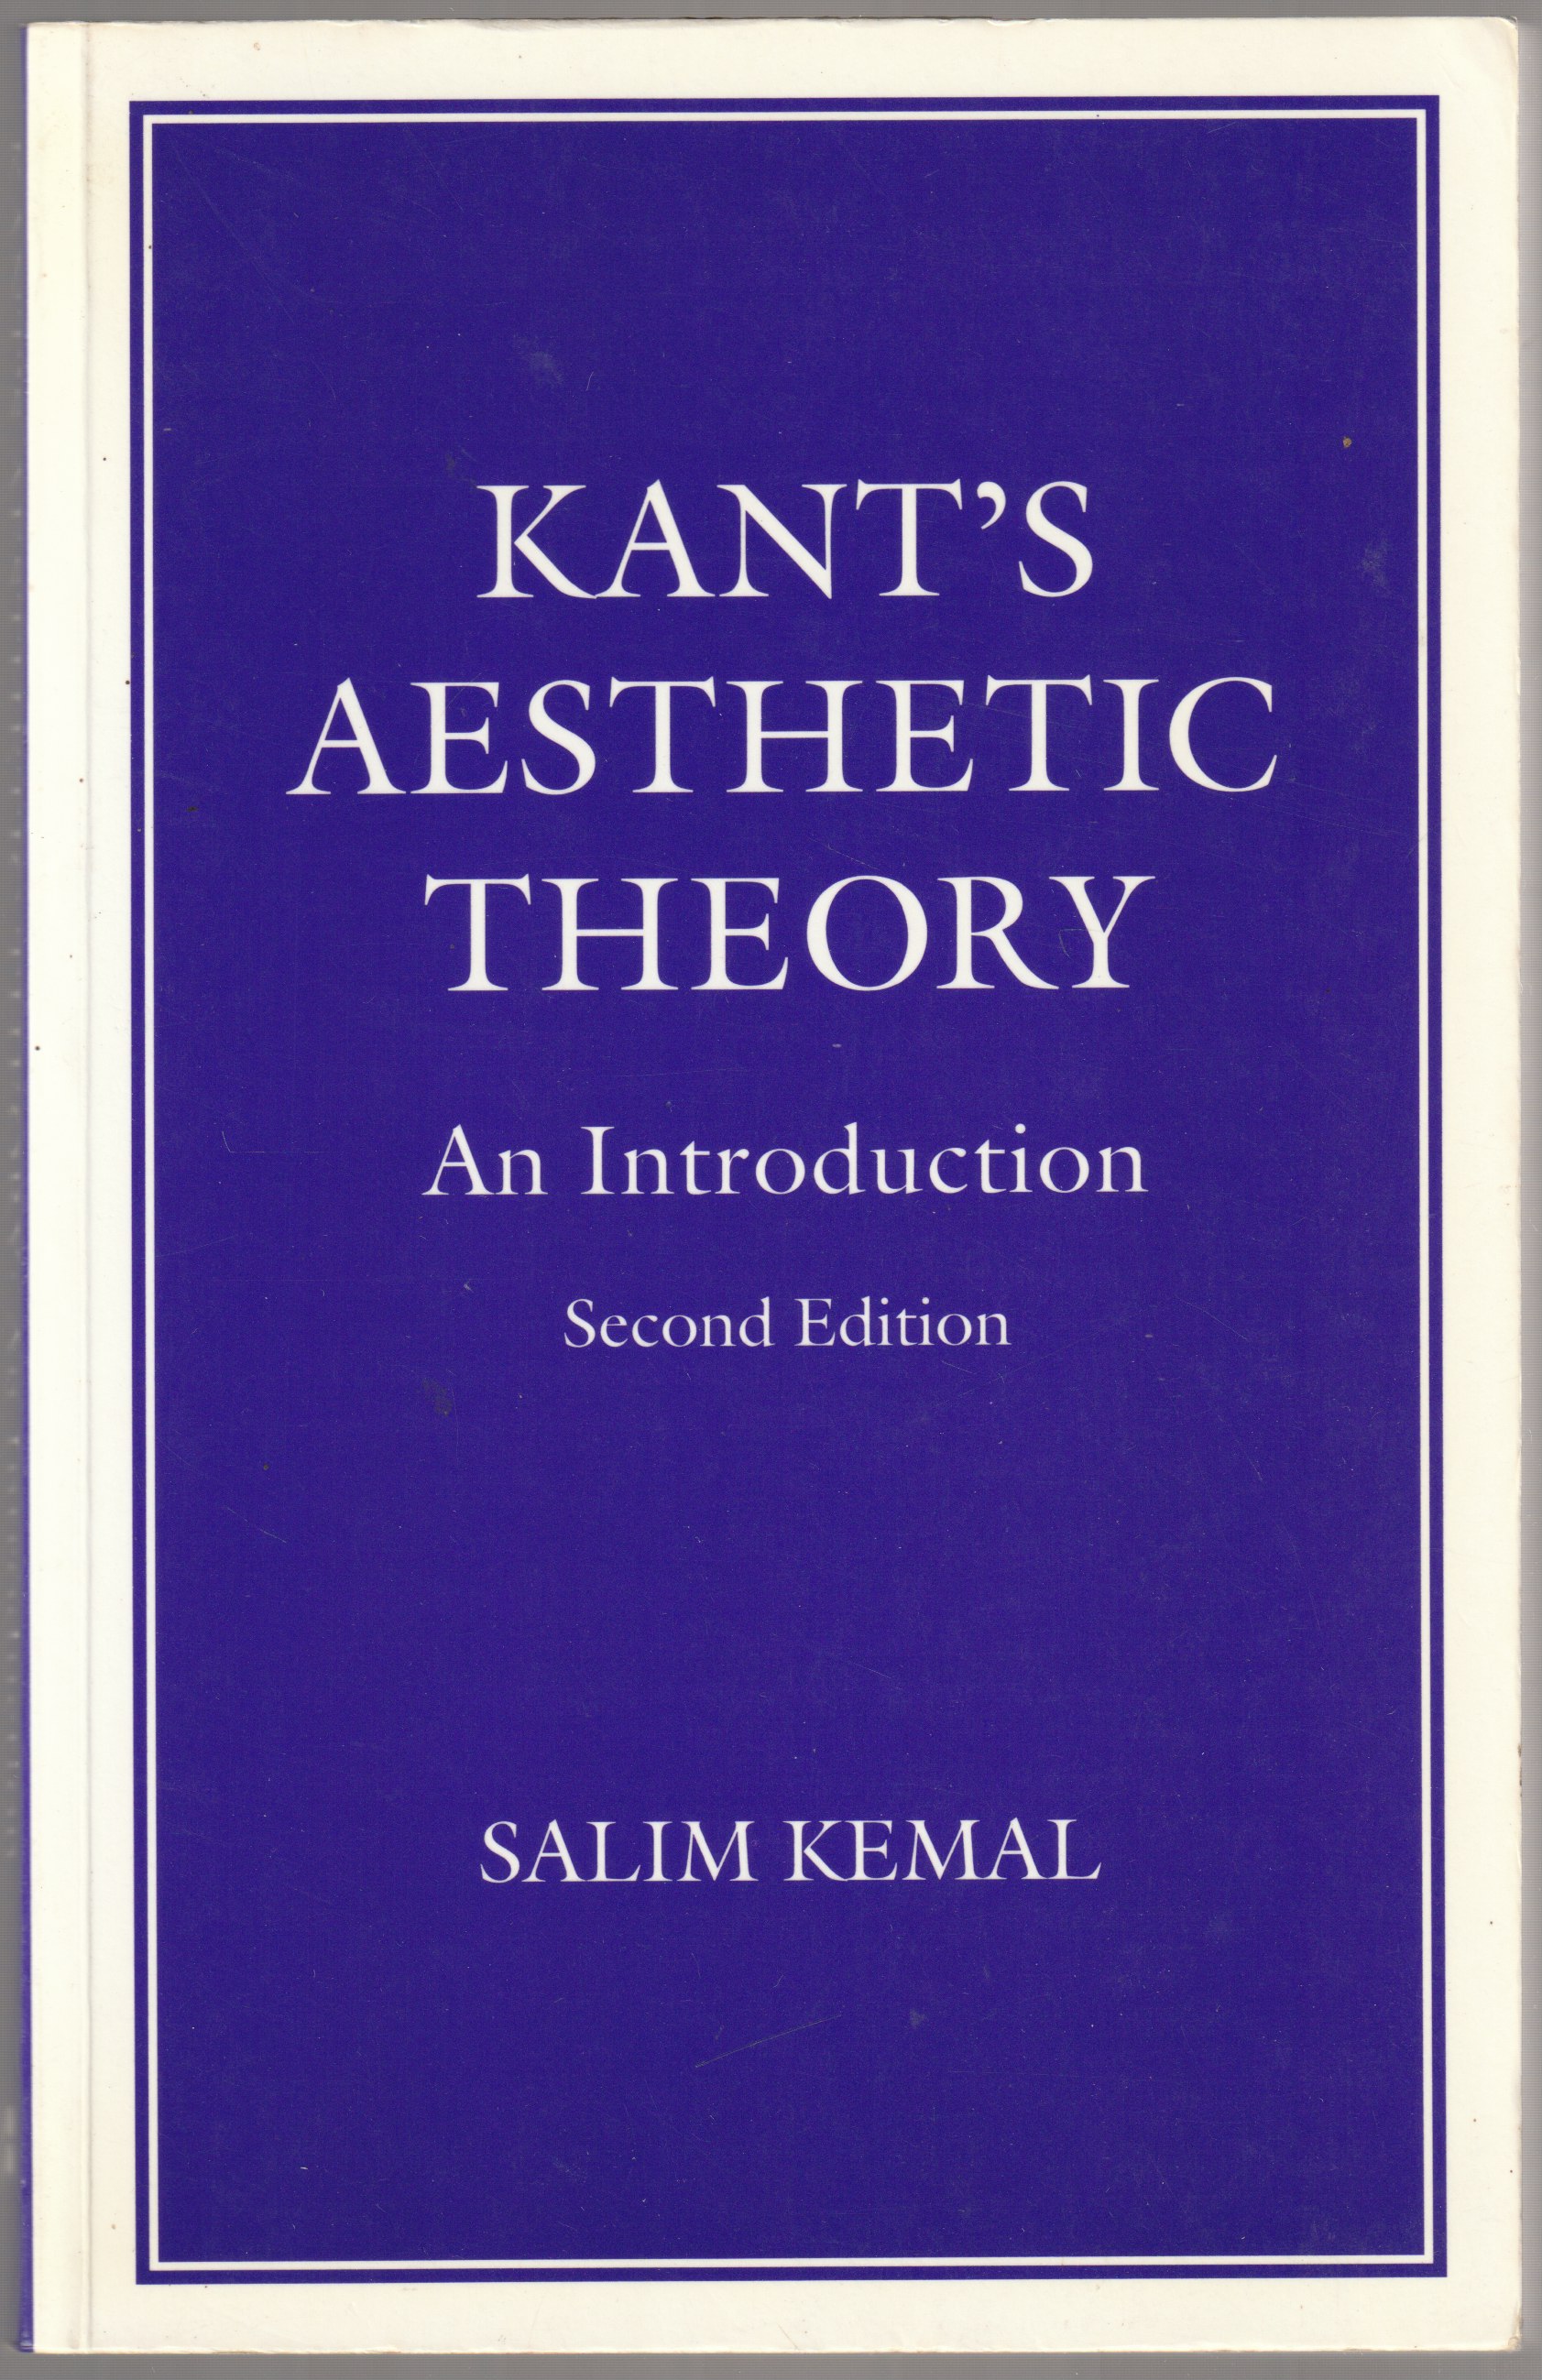 Kant's aesthetic theory : an introduction.